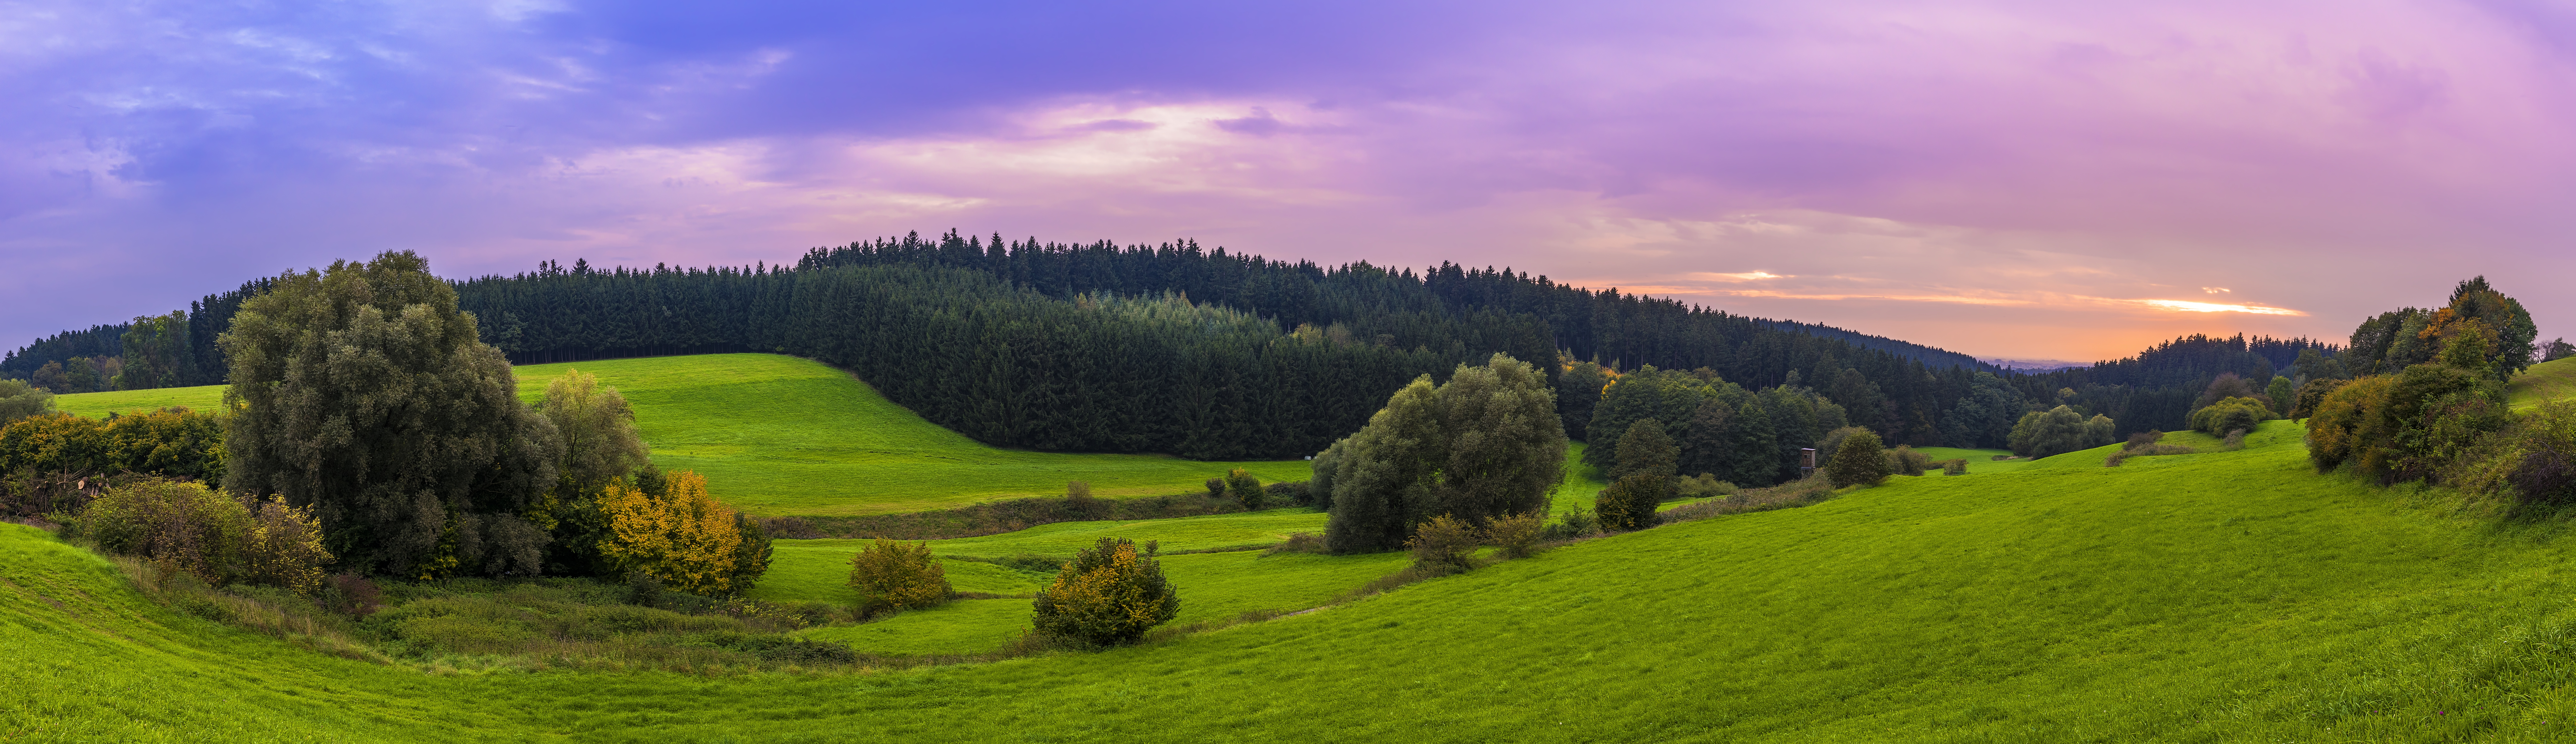 Free photo Large plains with green grass